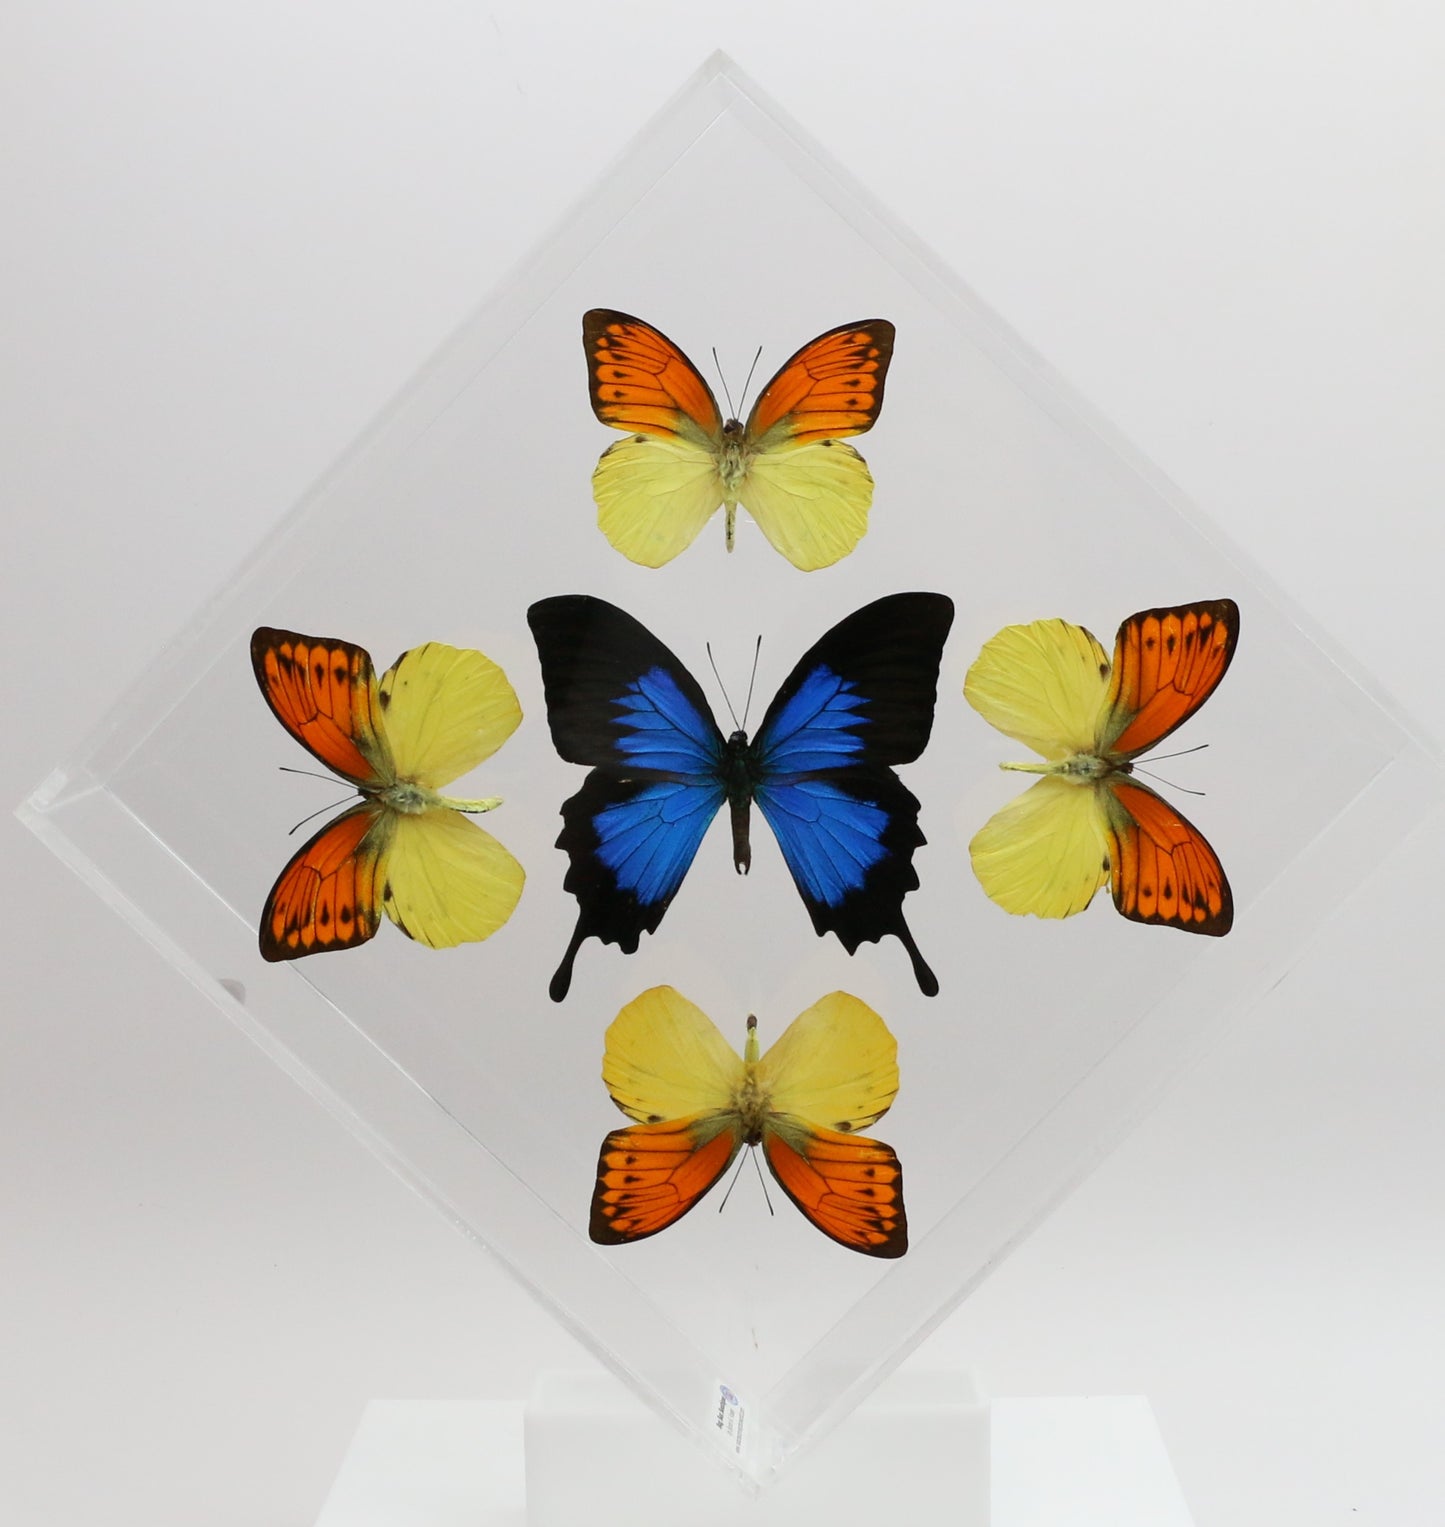 9101022 - Real Butterfly Acrylic Display Box - 10" X 10" - Vibrant Sulphurs / Blue Mountain Swallowtail